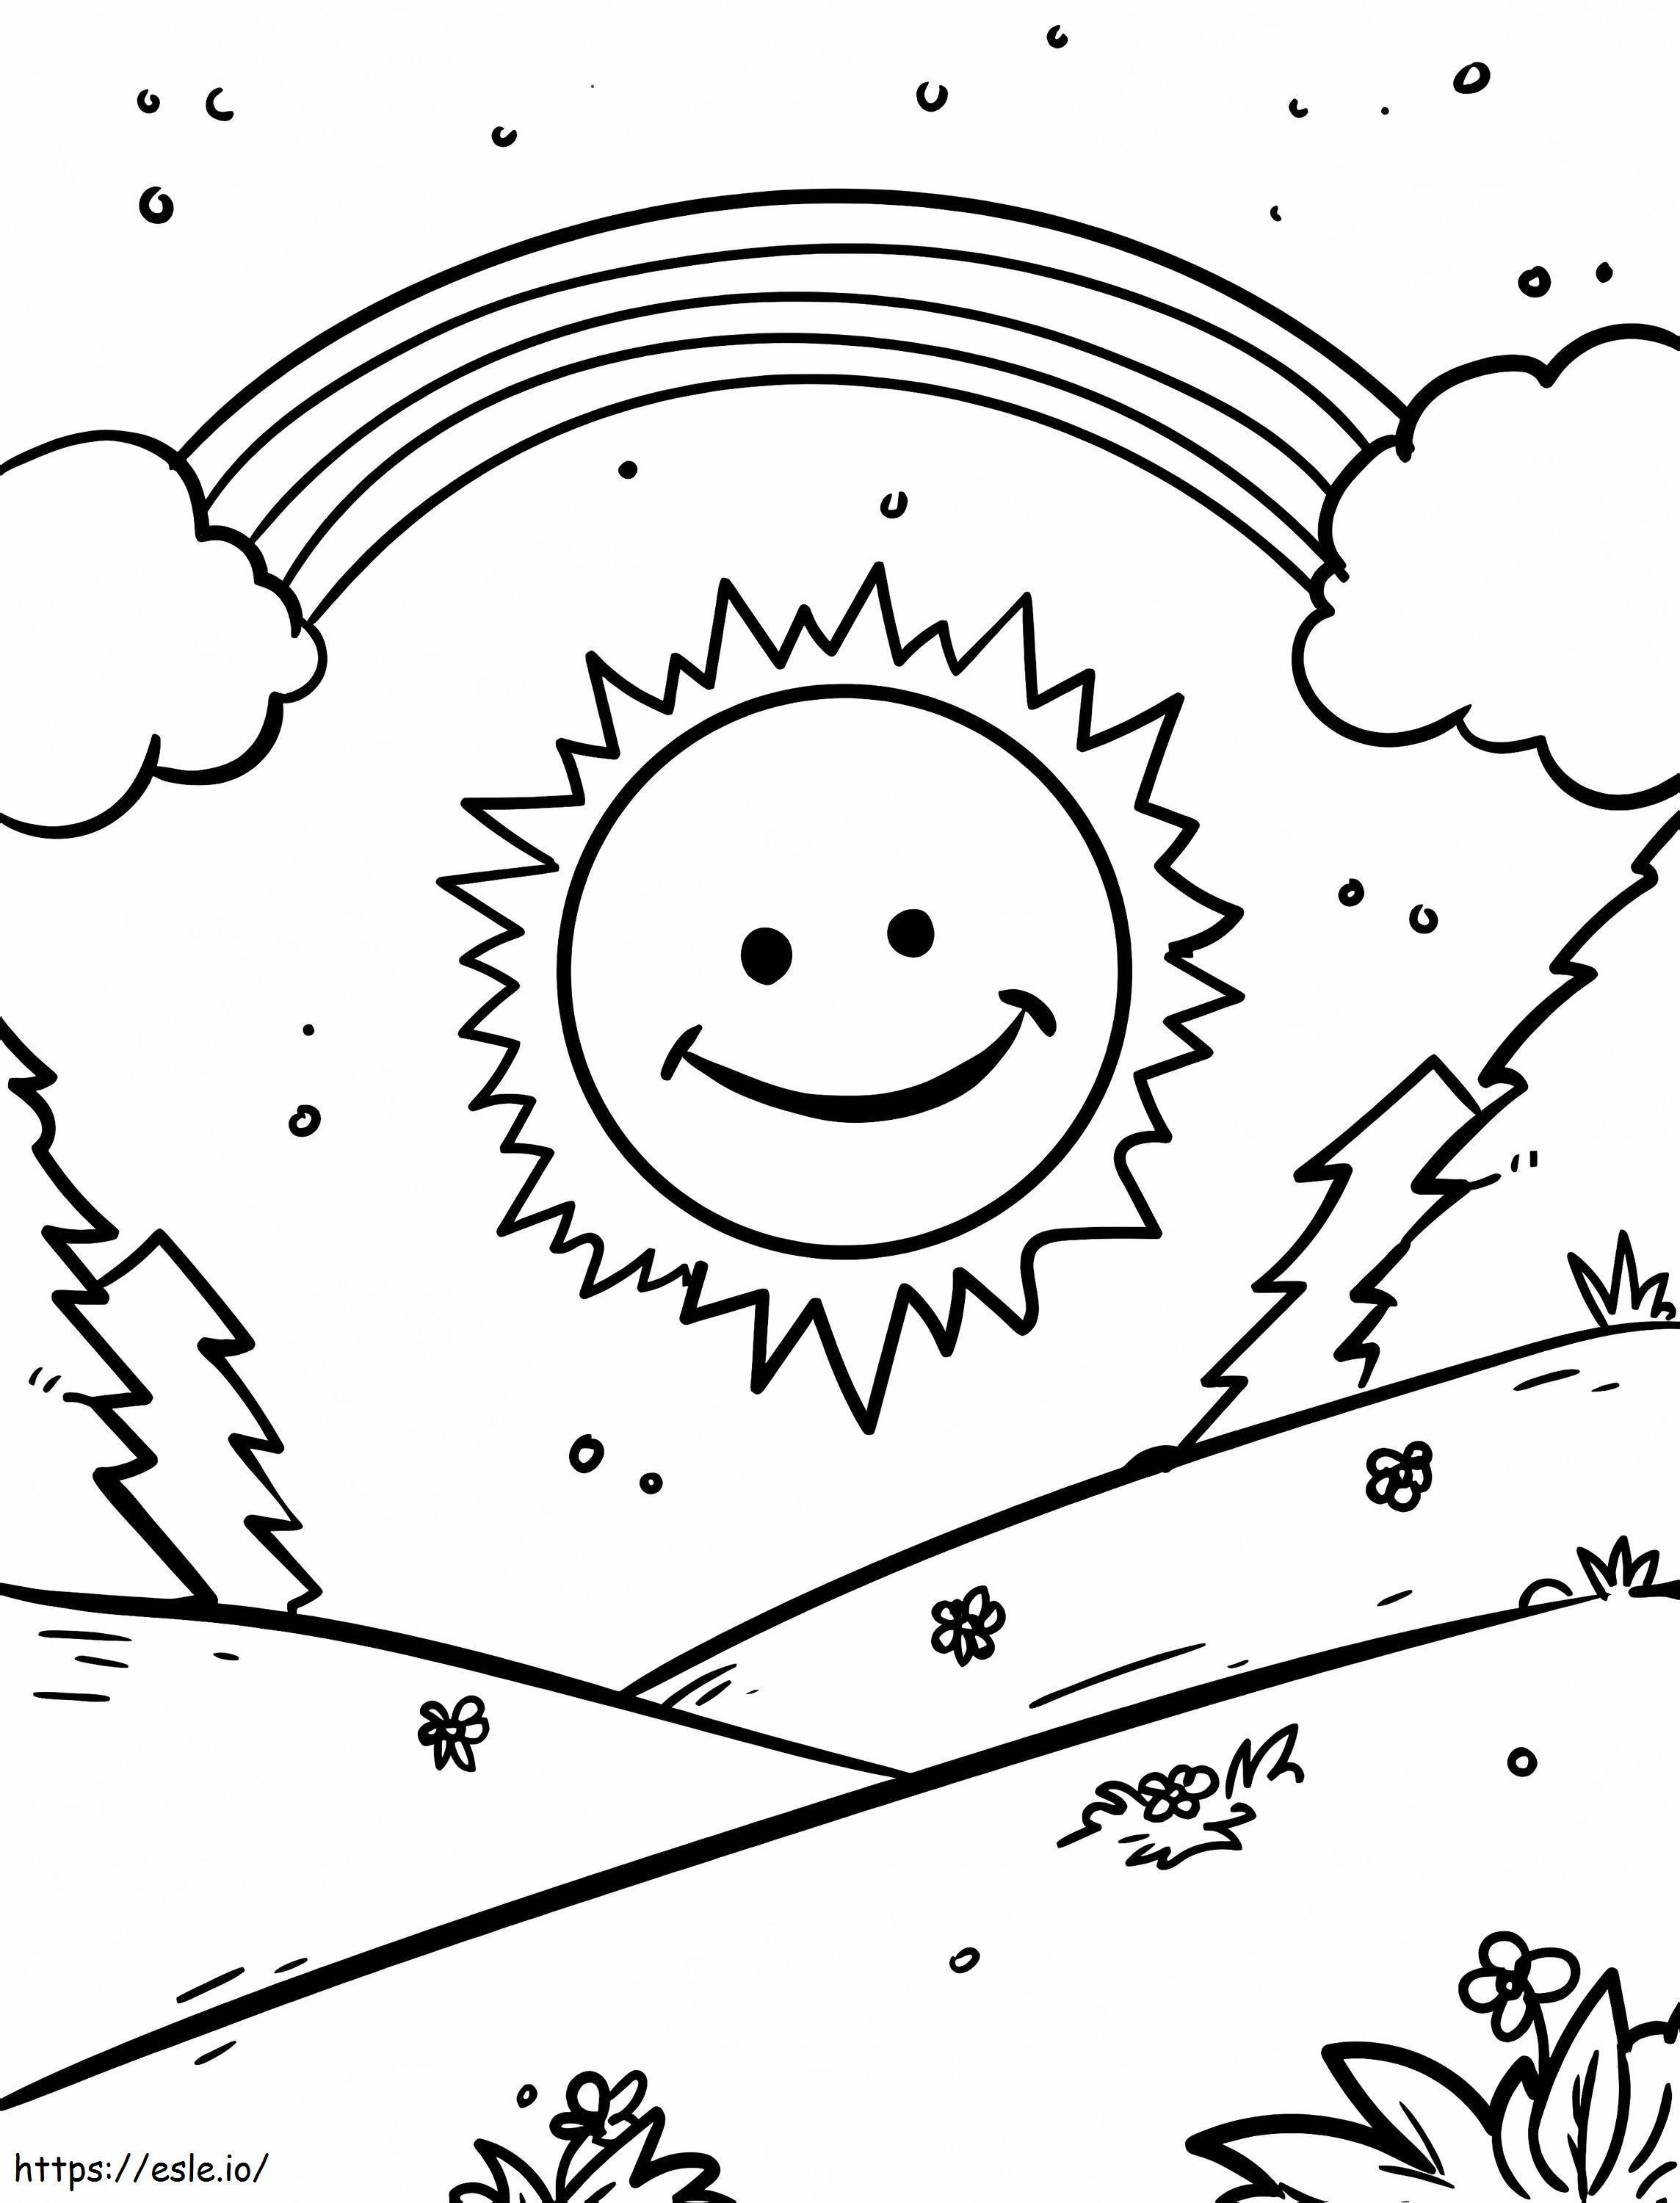 Rainbow With Cute Sun coloring page